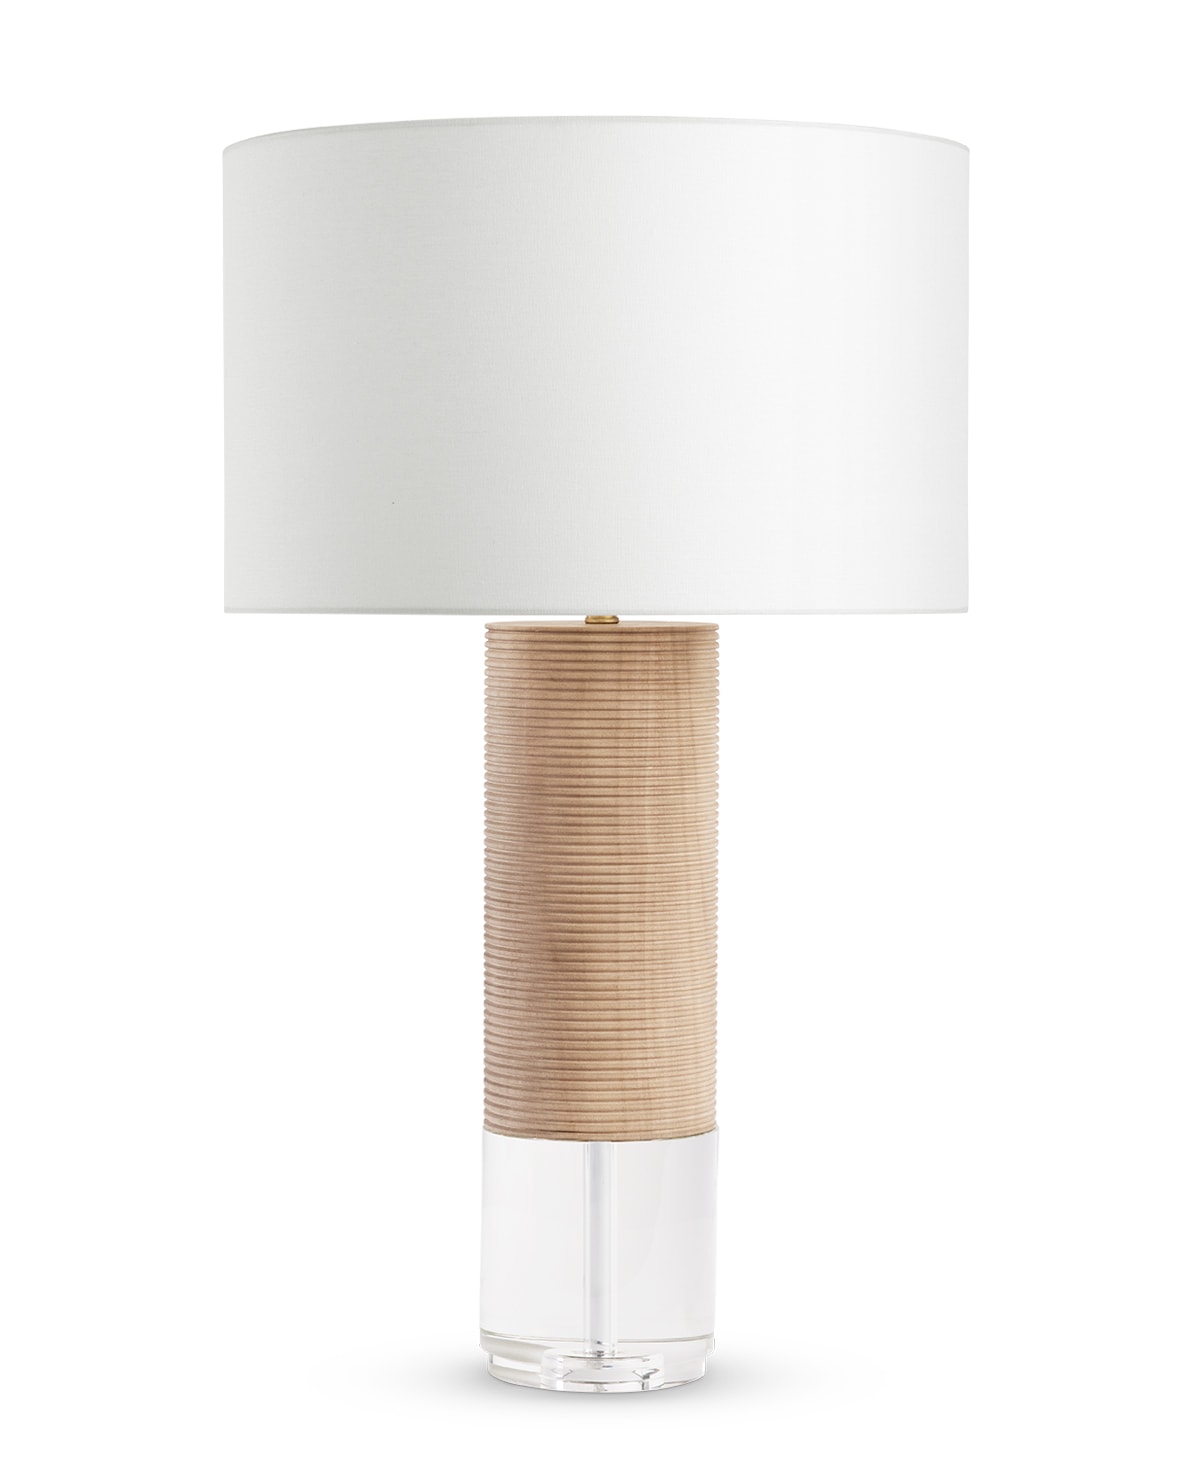 FlowDecor Admiral Table Lamp in wood with light finish and crystal and off-white linen drum shade (# 4615)